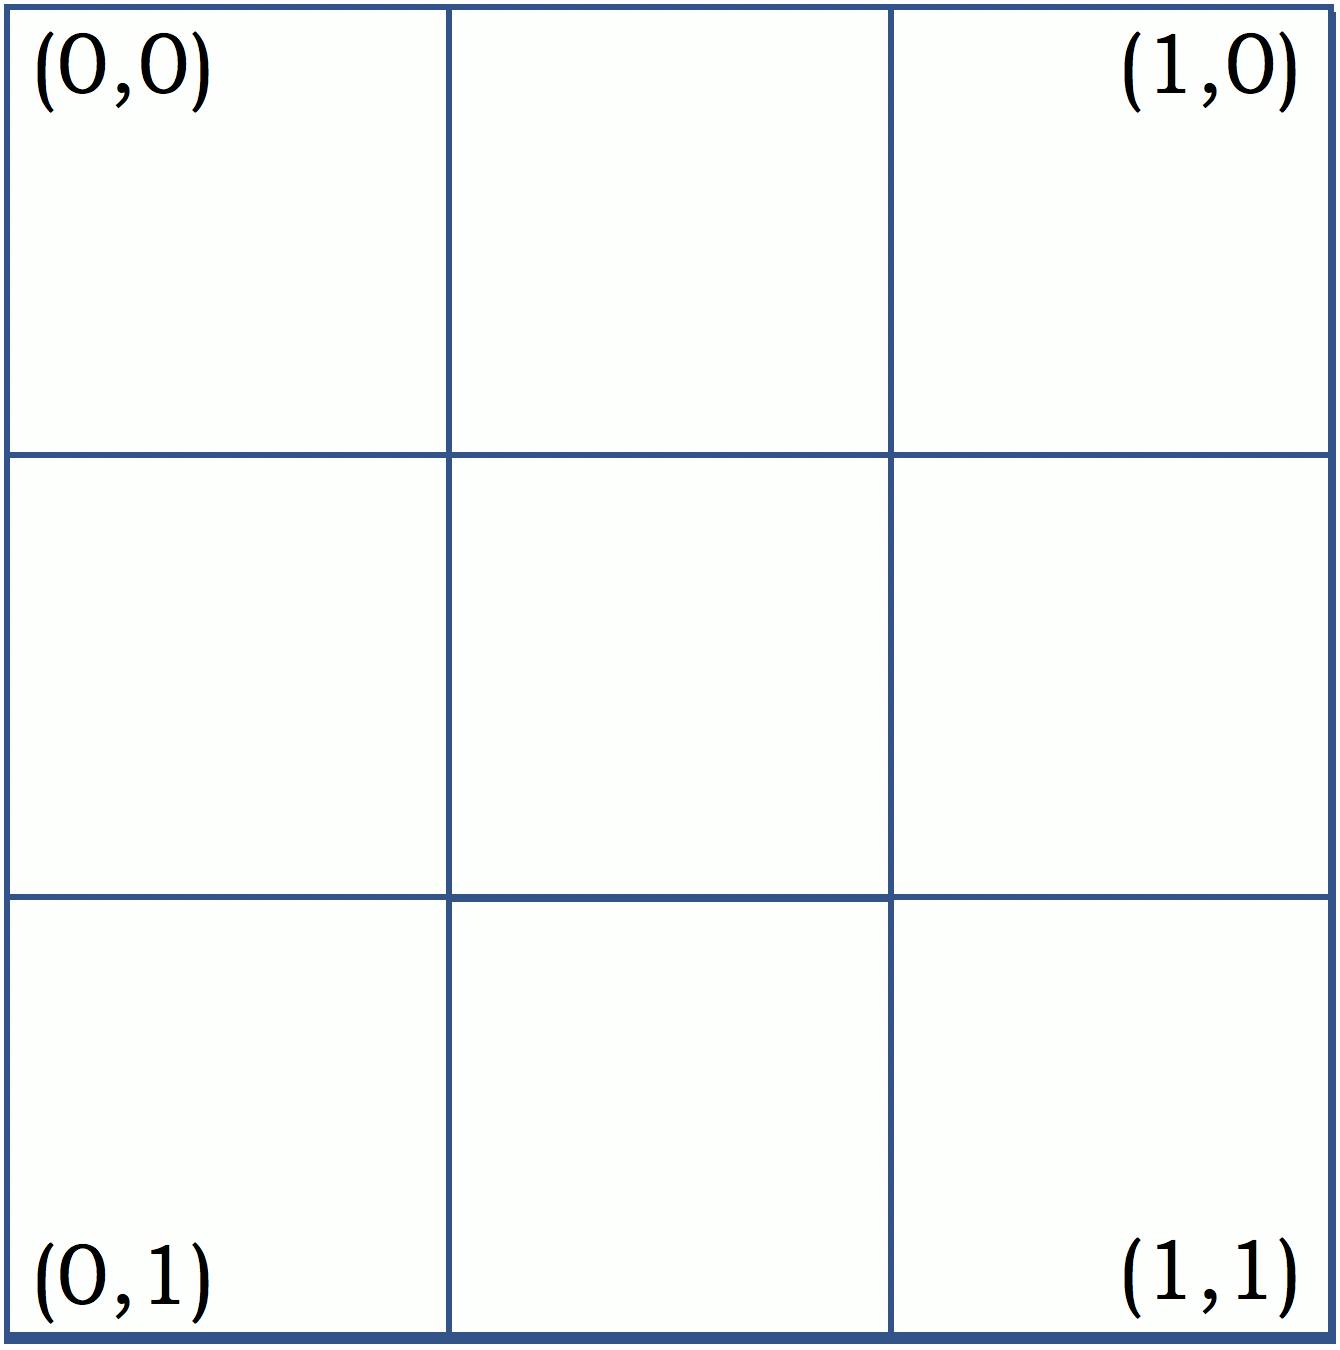 An example of a 3 × 3 sprite breakdown.